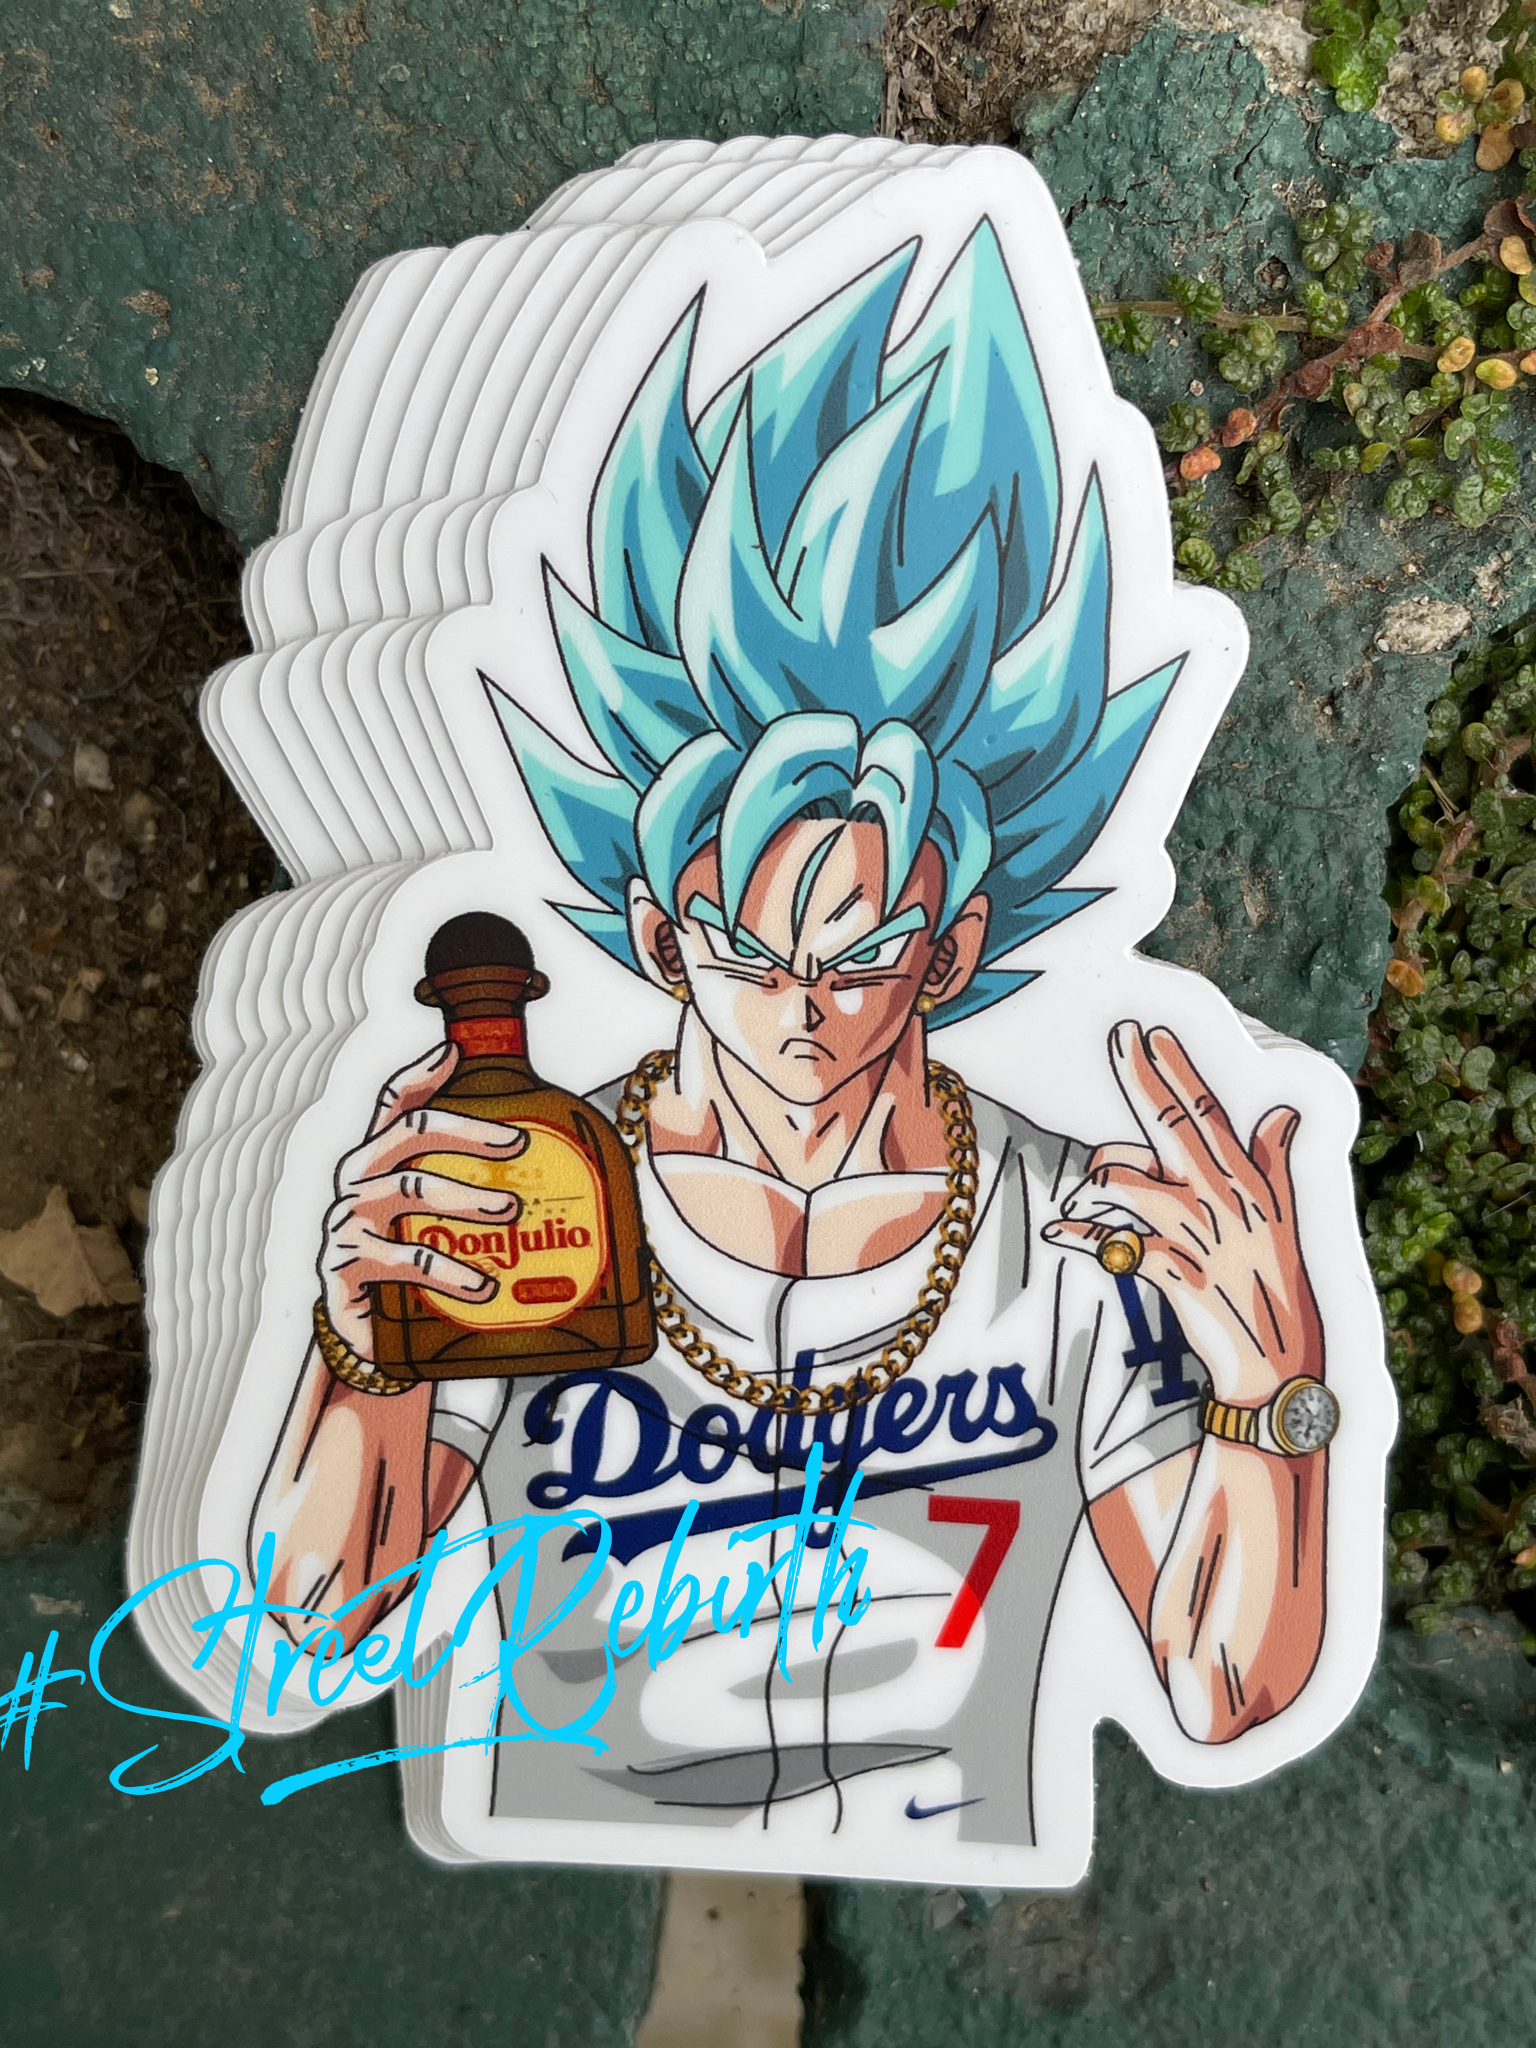 1 Anime Baseball Sticker – One 4 Inch Water Proof Vinyl Sticker – For Hydro Flask, Skateboard, Laptop, Planner, Car, Collecting, Gifting